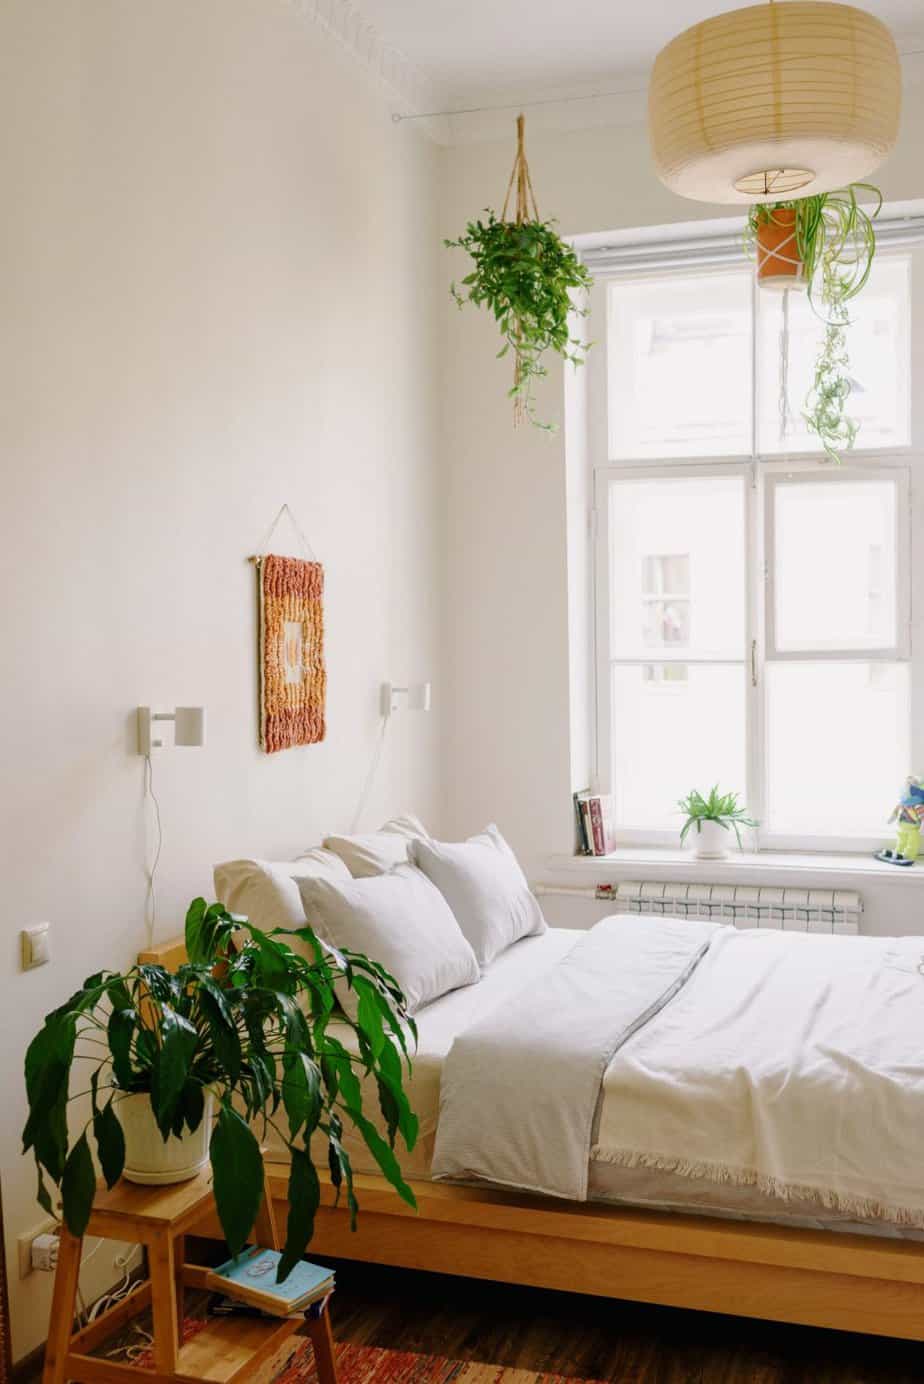 White bedroom with wooden accents and plants